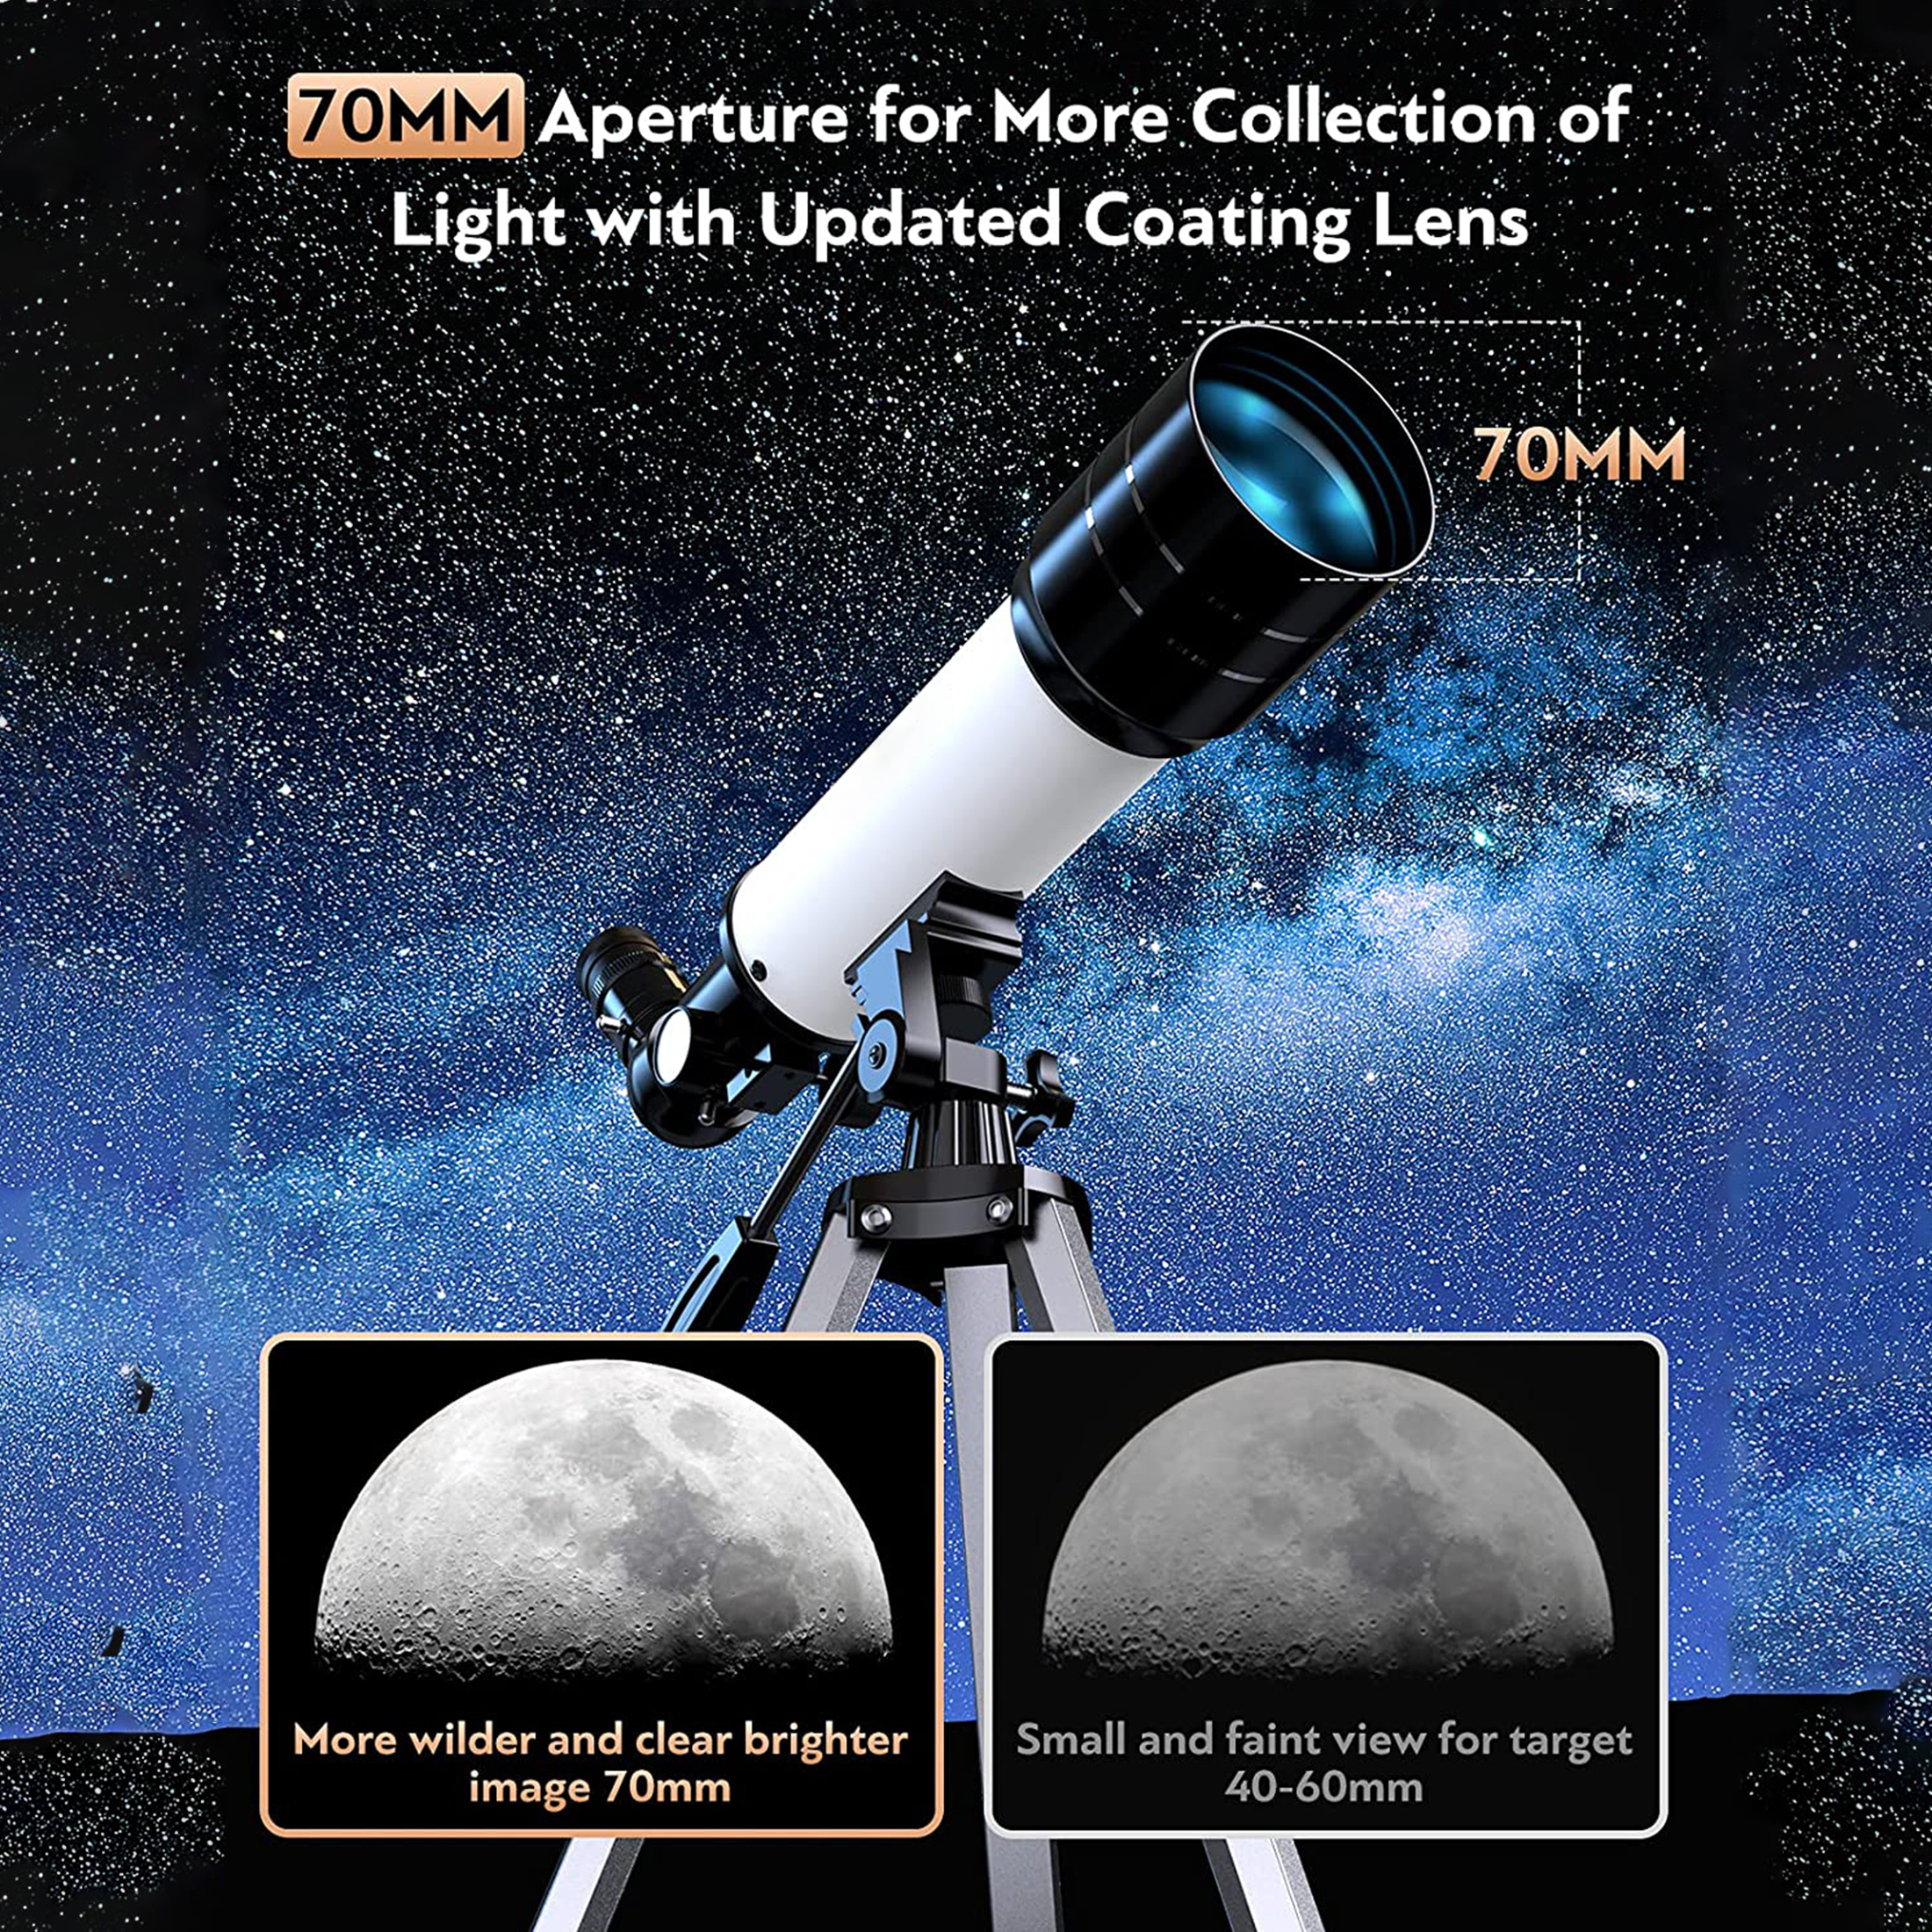 SUGIFT Telescope for Kids and Beginners 70mm Aperture 400mm AZ Mount Telescope with Tripod, Silver - image 5 of 7